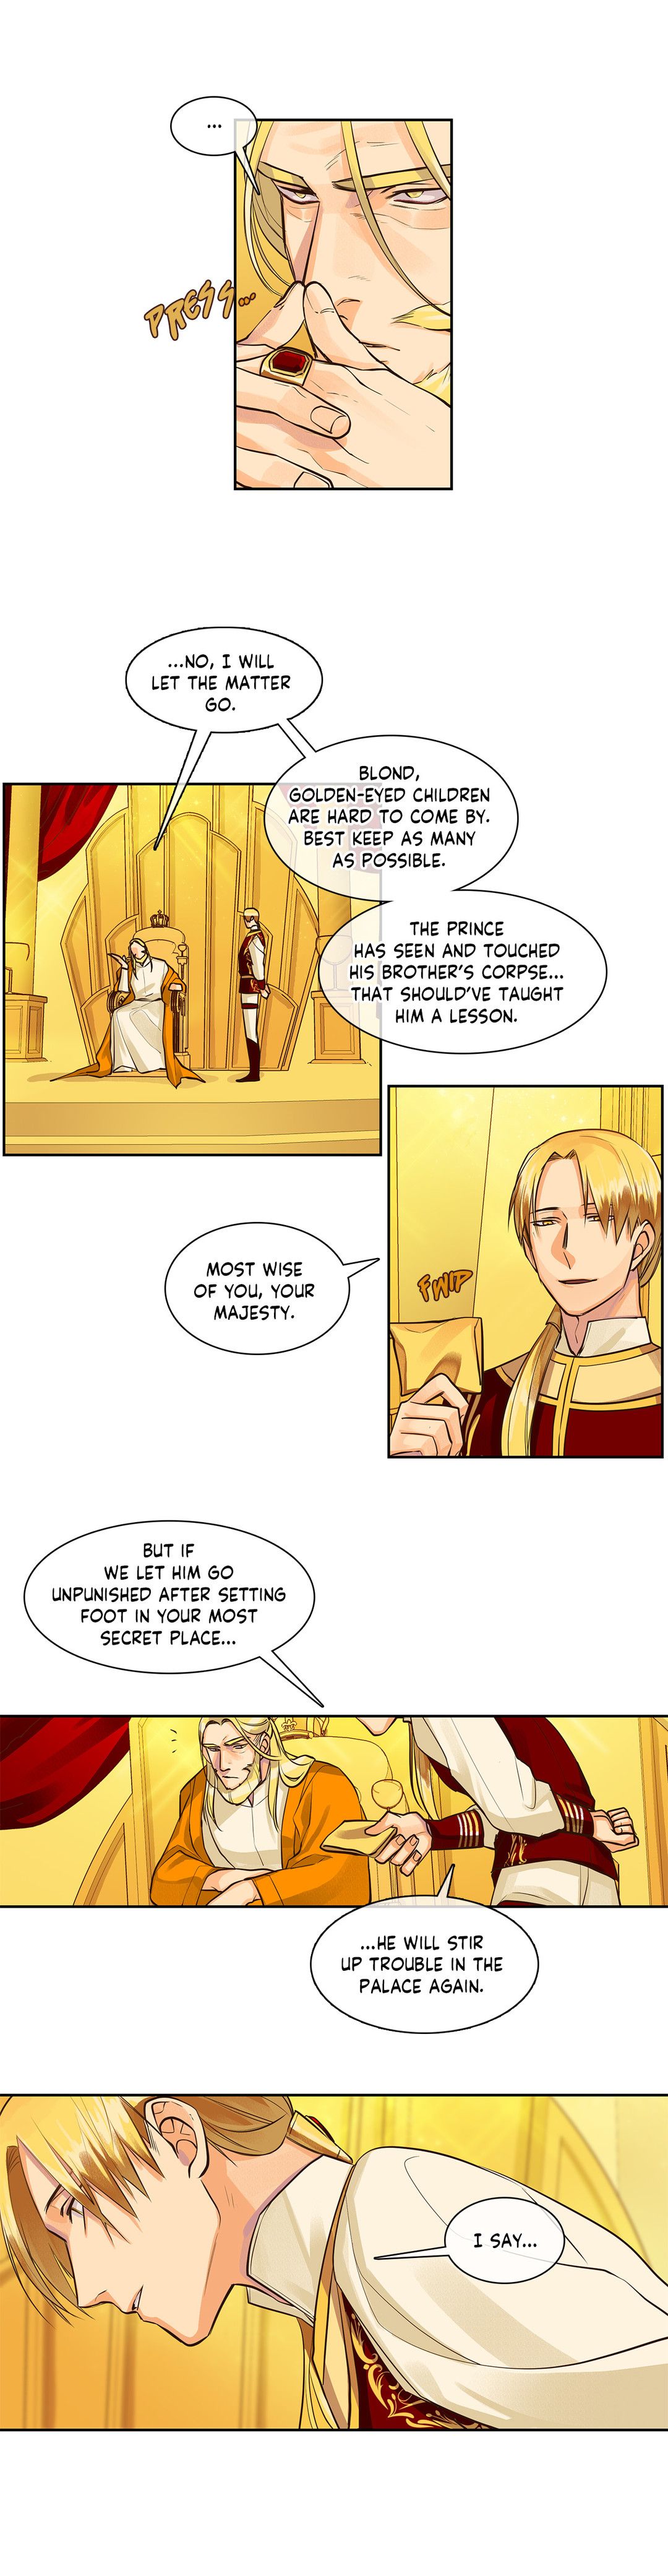 King's Maker - Page 2